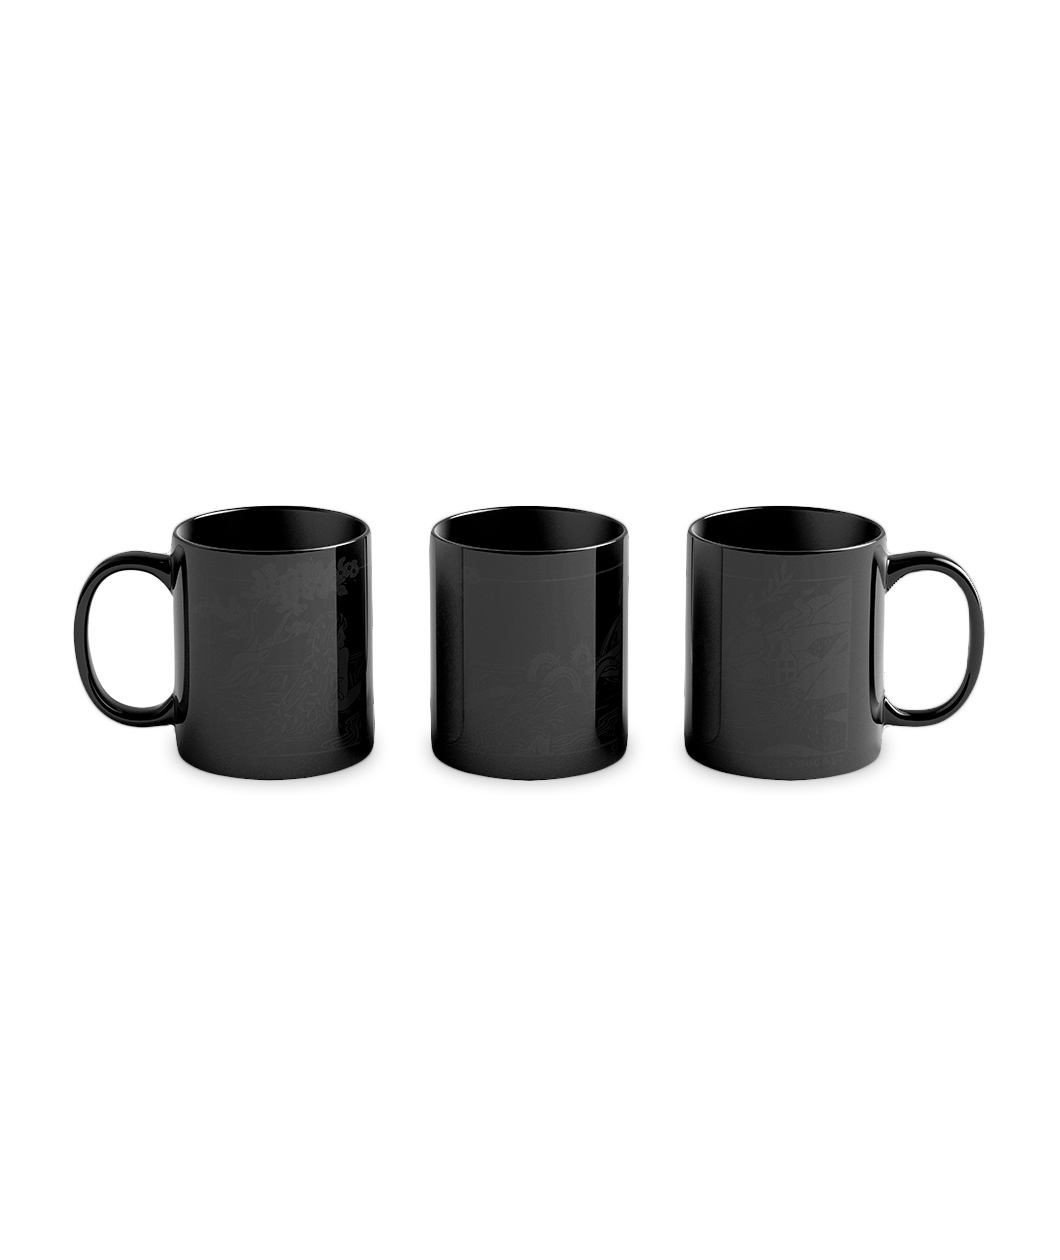 A line of three black mugs from Spirits looking completely black before they change color to reveal an image.